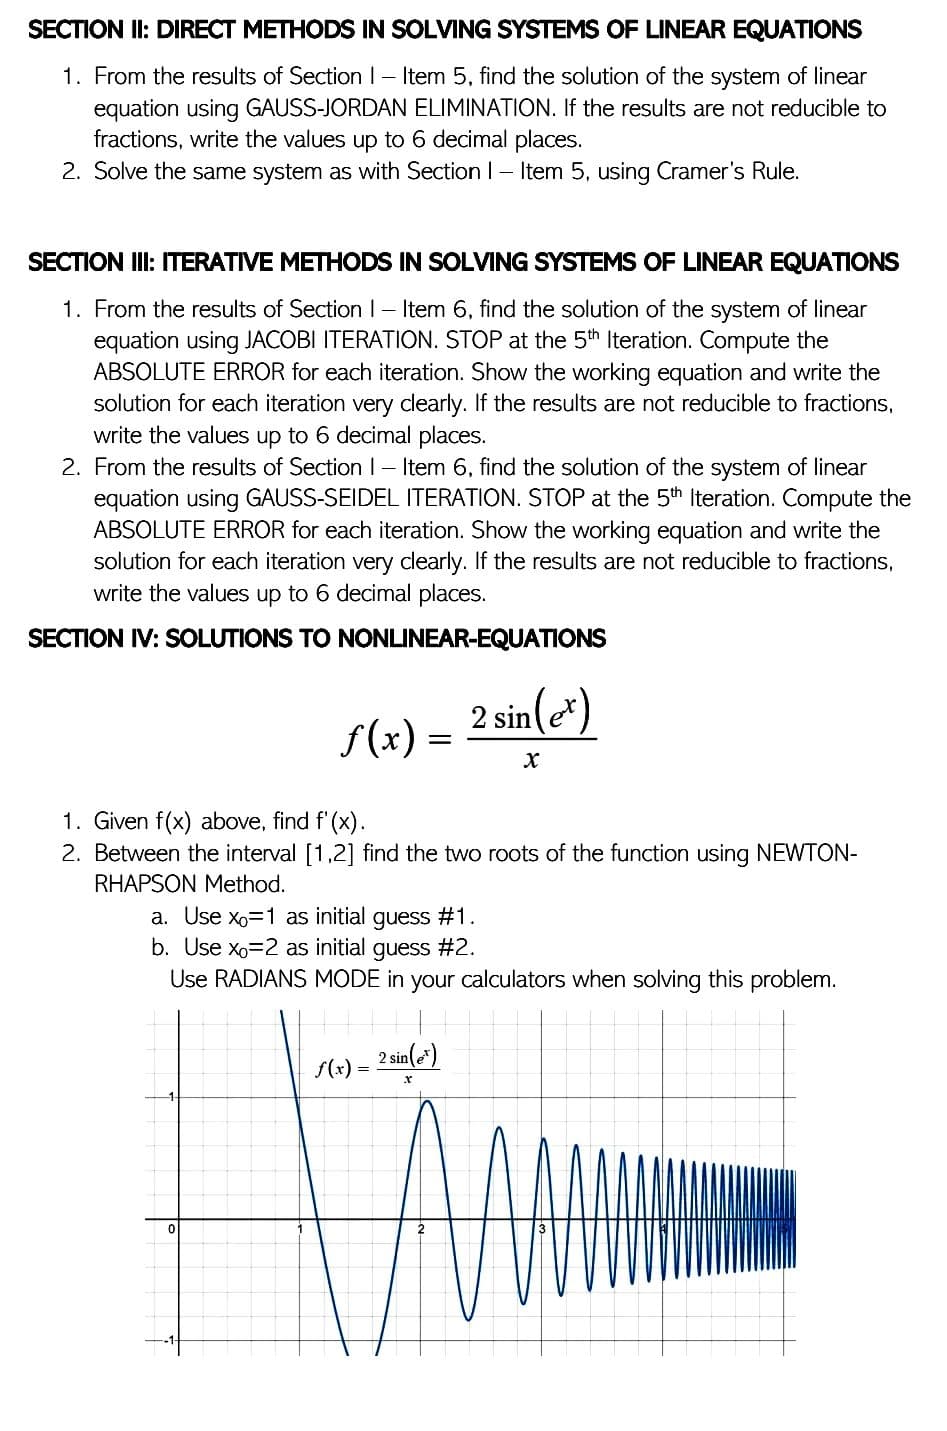 SECTION II: DIRECT METHODS IN SOLVING SYSTEMS OF LINEAR EQUATIONS
1. From the results of Section 1- Item 5, find the solution of the system of linear
equation using GAUSS-JORDAN ELIMINATION. If the results are not reducible to
fractions, write the values up to 6 decimal places.
2. Solve the same system as with Section 1- Item 5, using Cramer's Rule.
SECTION III: ITERATIVE METHODS IN SOLVING SYSTEMS OF LINEAR EQUATIONS
1. From the results of Section 1 - Item 6, find the solution of the system of linear
equation using JACOBI ITERATION. STOP at the 5th Iteration. Compute the
ABSOLUTE ERROR for each iteration. Show the working equation and write the
solution for each iteration very clearly. If the results are not reducible to fractions,
write the values up to 6 decimal places.
2. From the results of Section 1 - Item 6, find the solution of the system of linear
equation using GAUSS-SEIDEL ITERATION. STOP at the 5th Iteration. Compute the
ABSOLUTE ERROR for each iteration. Show the working equation and write the
solution for each iteration very clearly. If the results are not reducible to fractions,
write the values up to 6 decimal places.
SECTION IV: SOLUTIONS TO NONLINEAR-EQUATIONS
ƒ(x) =
2 sin (et)
X
1. Given f(x) above, find f'(x).
2. Between the interval [1,2] find the two roots of the function using NEWTON-
RHAPSON Method.
a. Use x₁=1 as initial guess #1.
b. Use x₁=2 as initial guess #2.
Use RADIANS MODE in your calculators when solving this problem.
2 sin(e)
f(x)
X
0
=
=